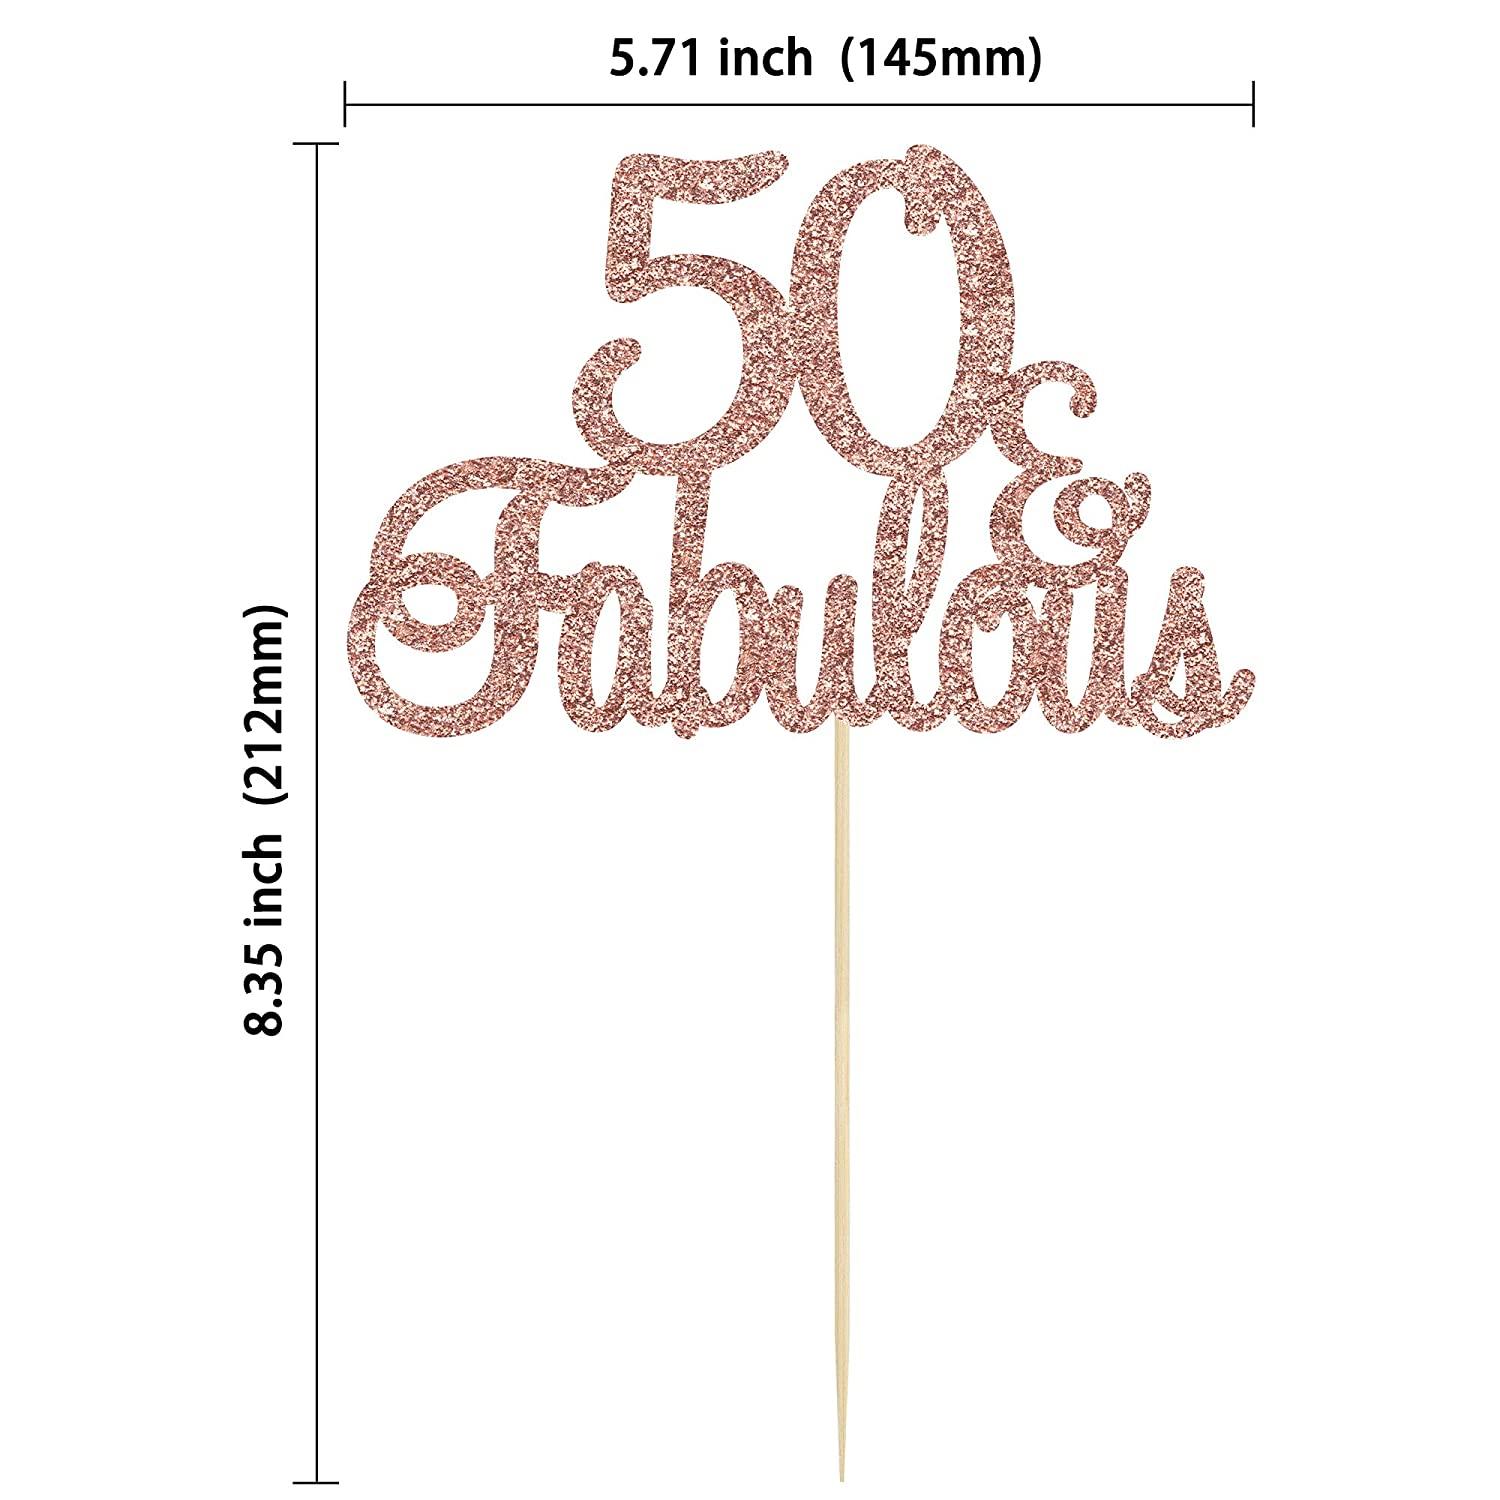 Fabulous & 50 Cake Topper Gold Glitter, 50th Birthday Party Decoration  Ideas